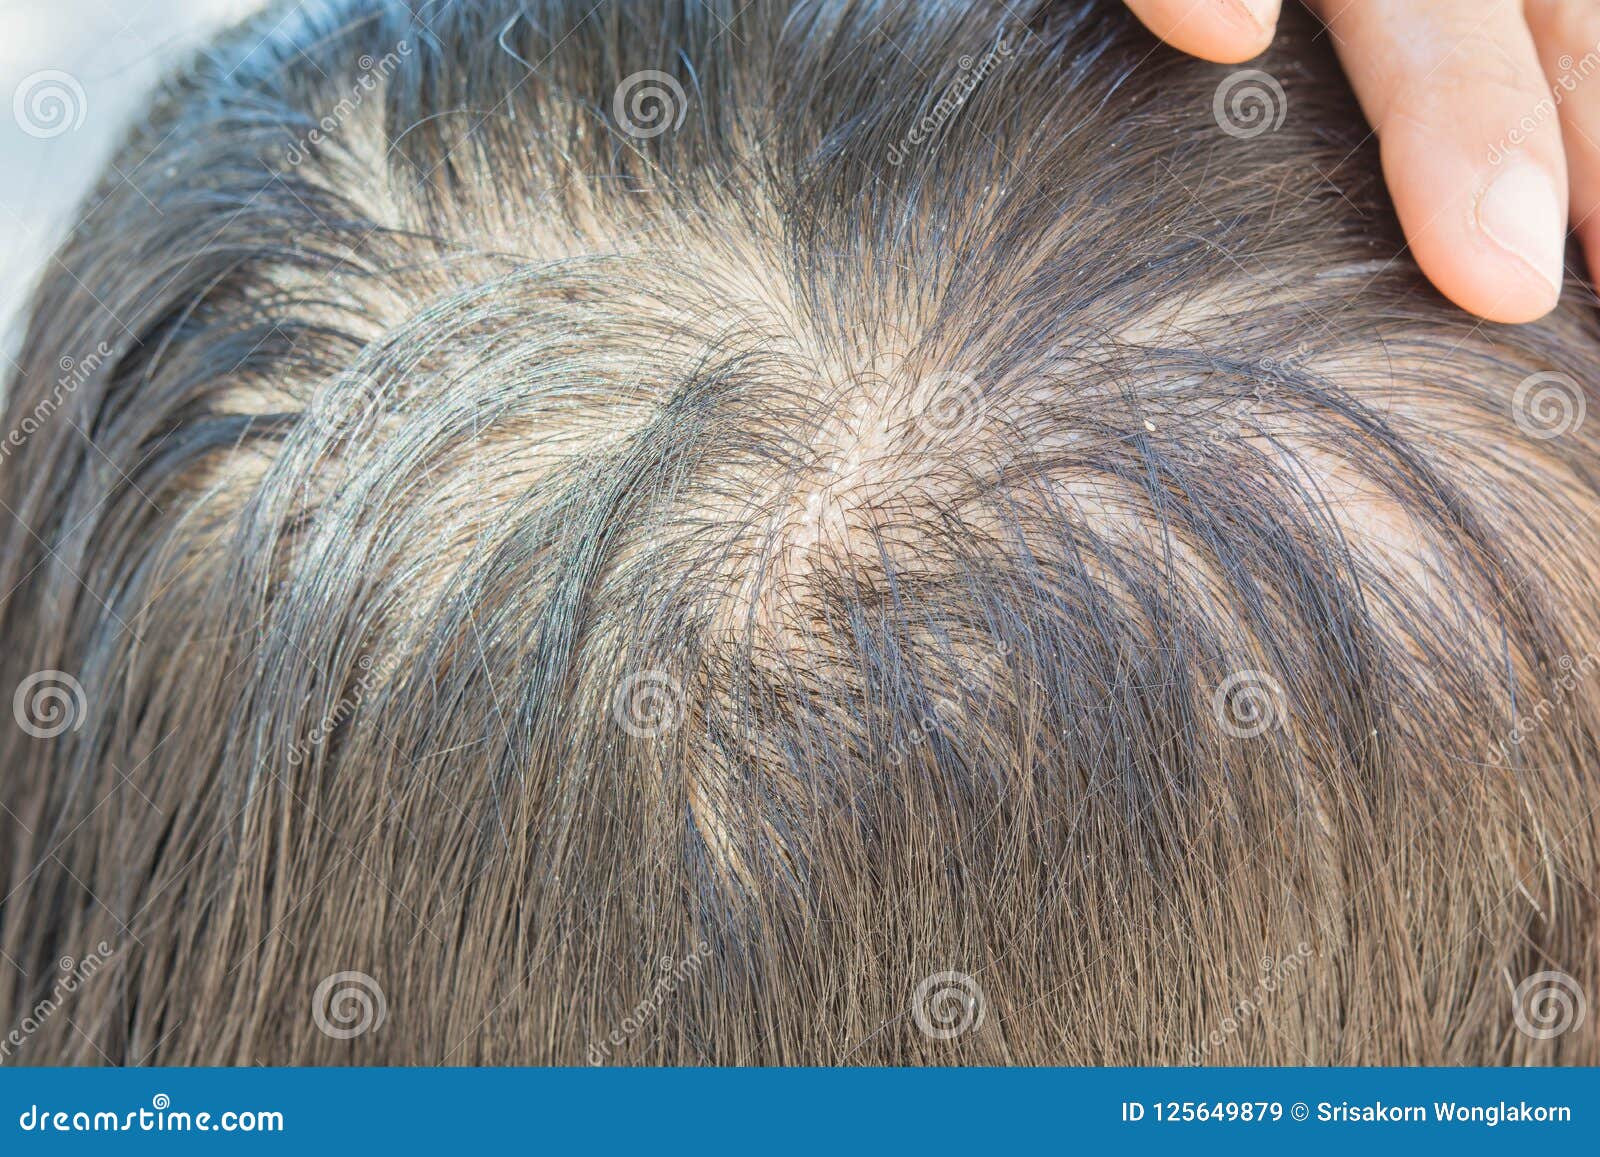 Thin hair and dandruff stock image. Image of care, back - 125649879